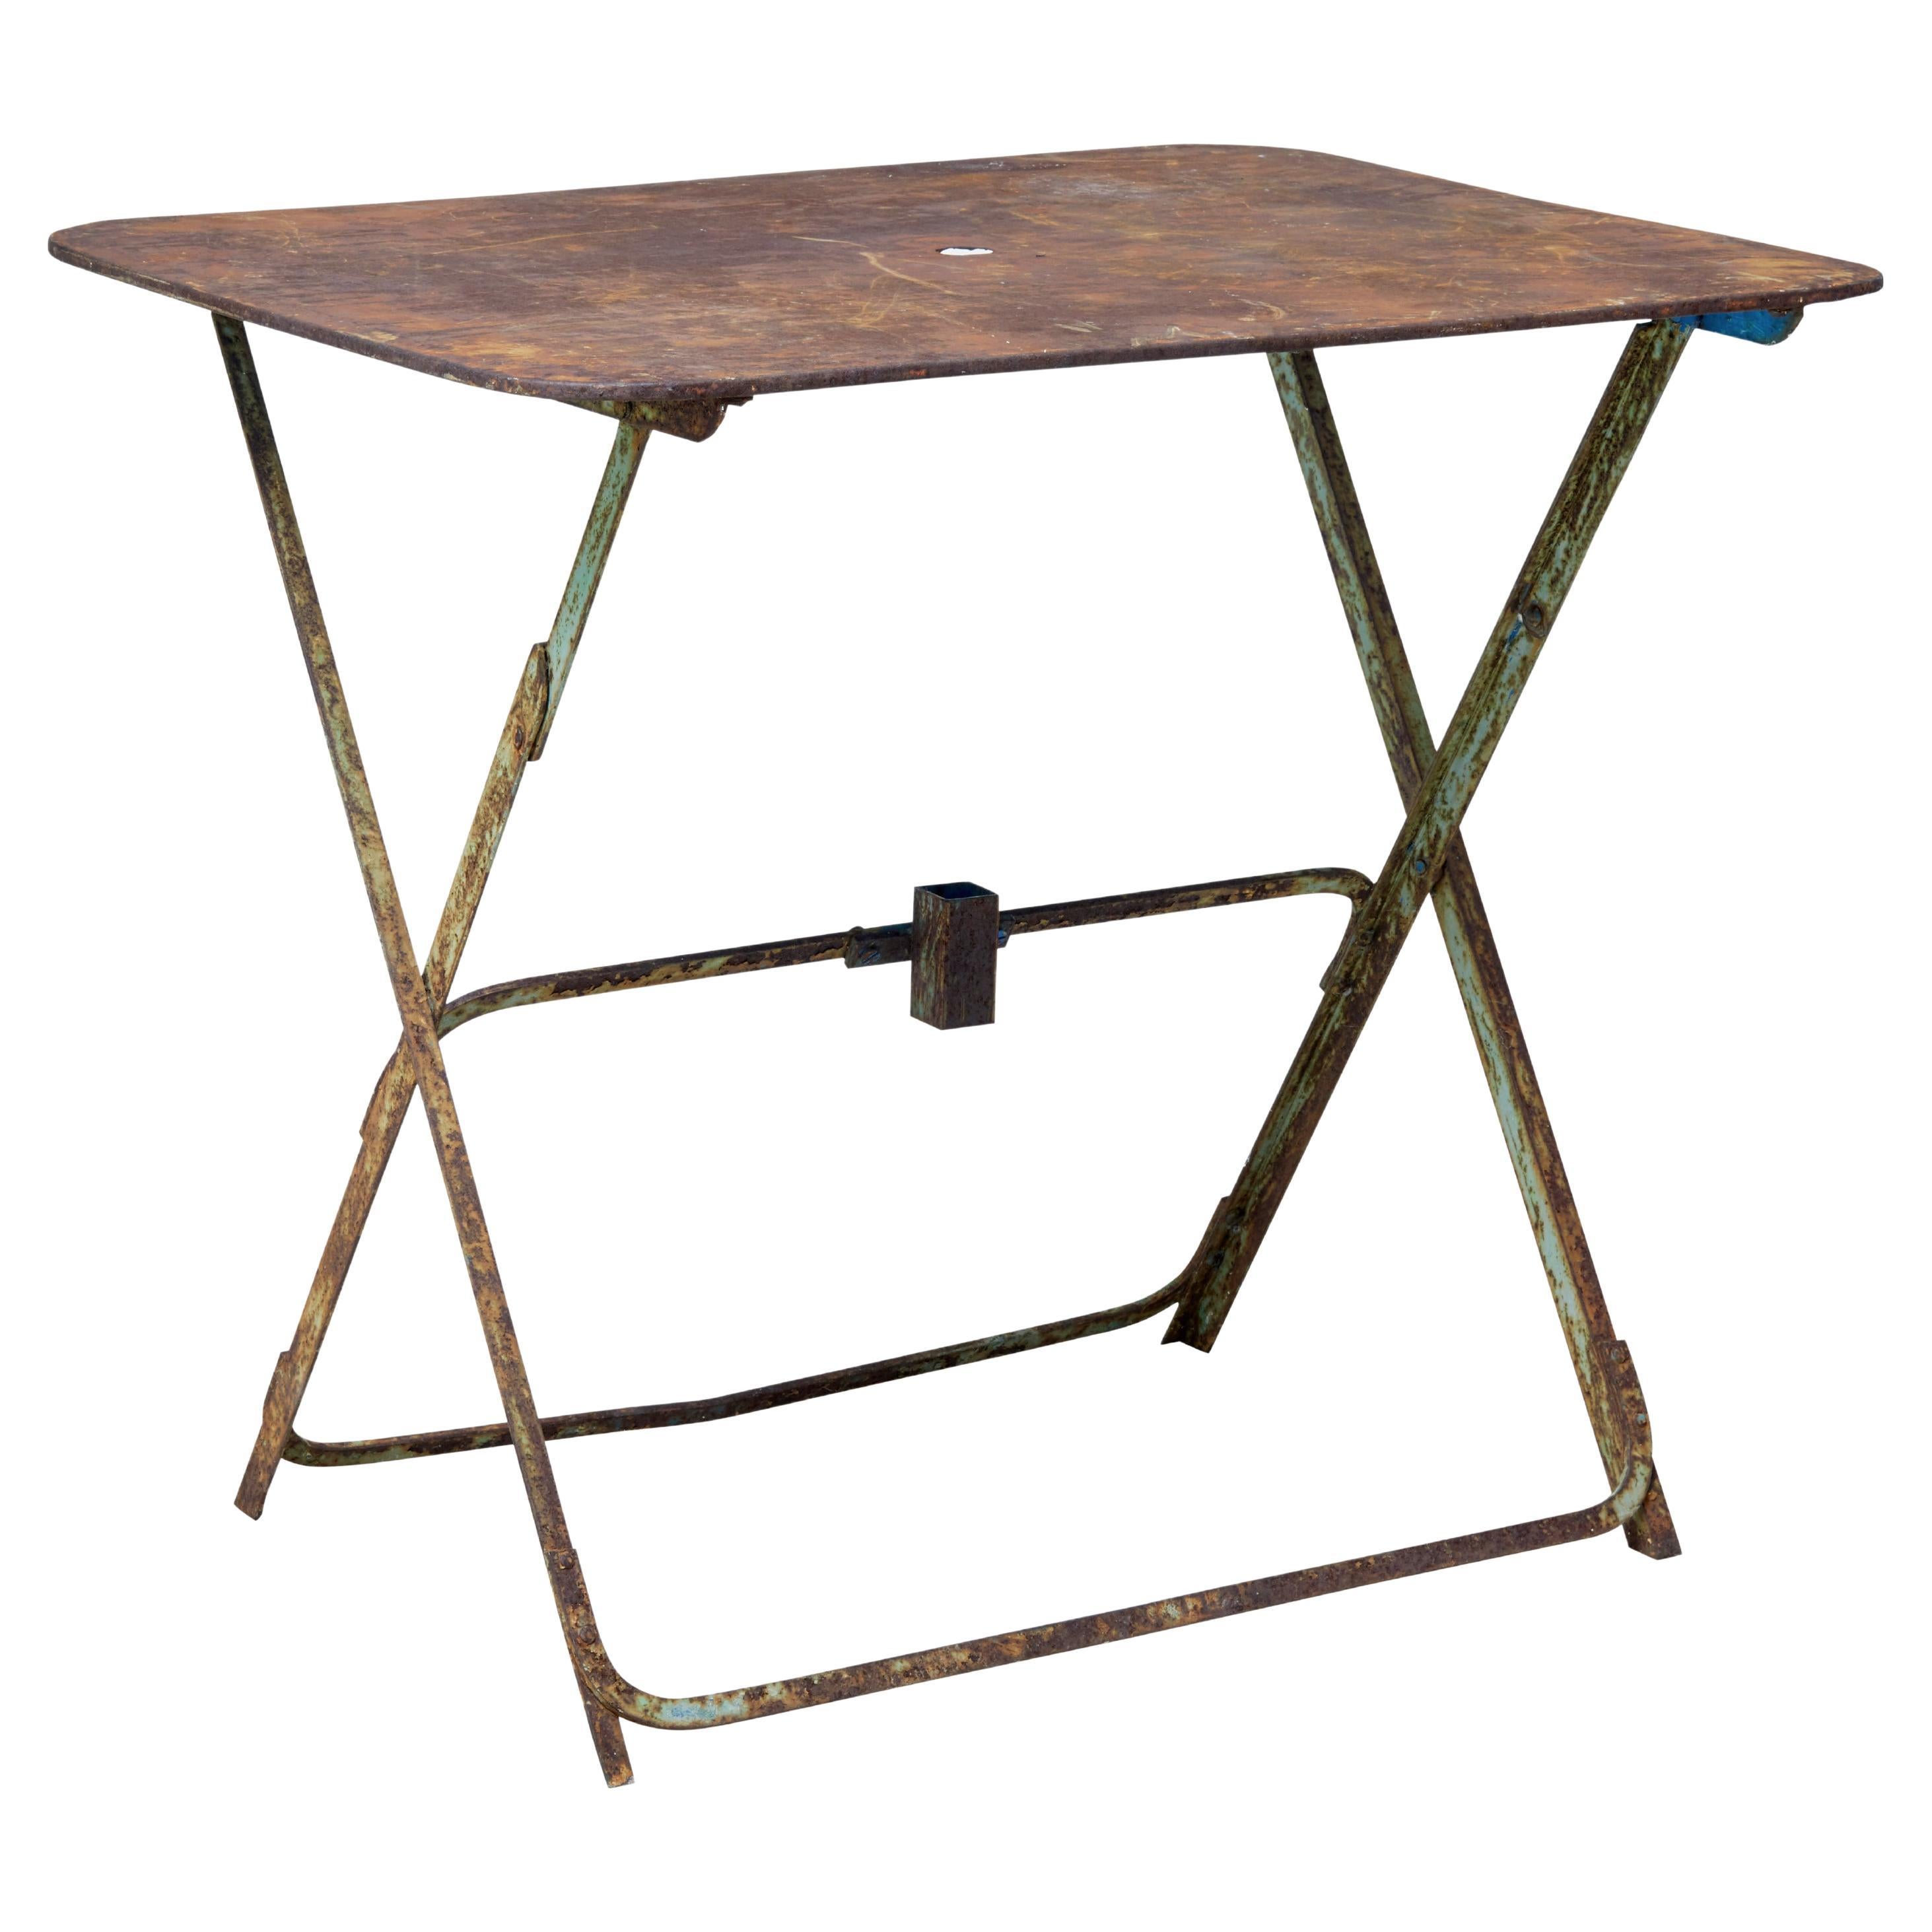 Early 20th century French folding metal garden table